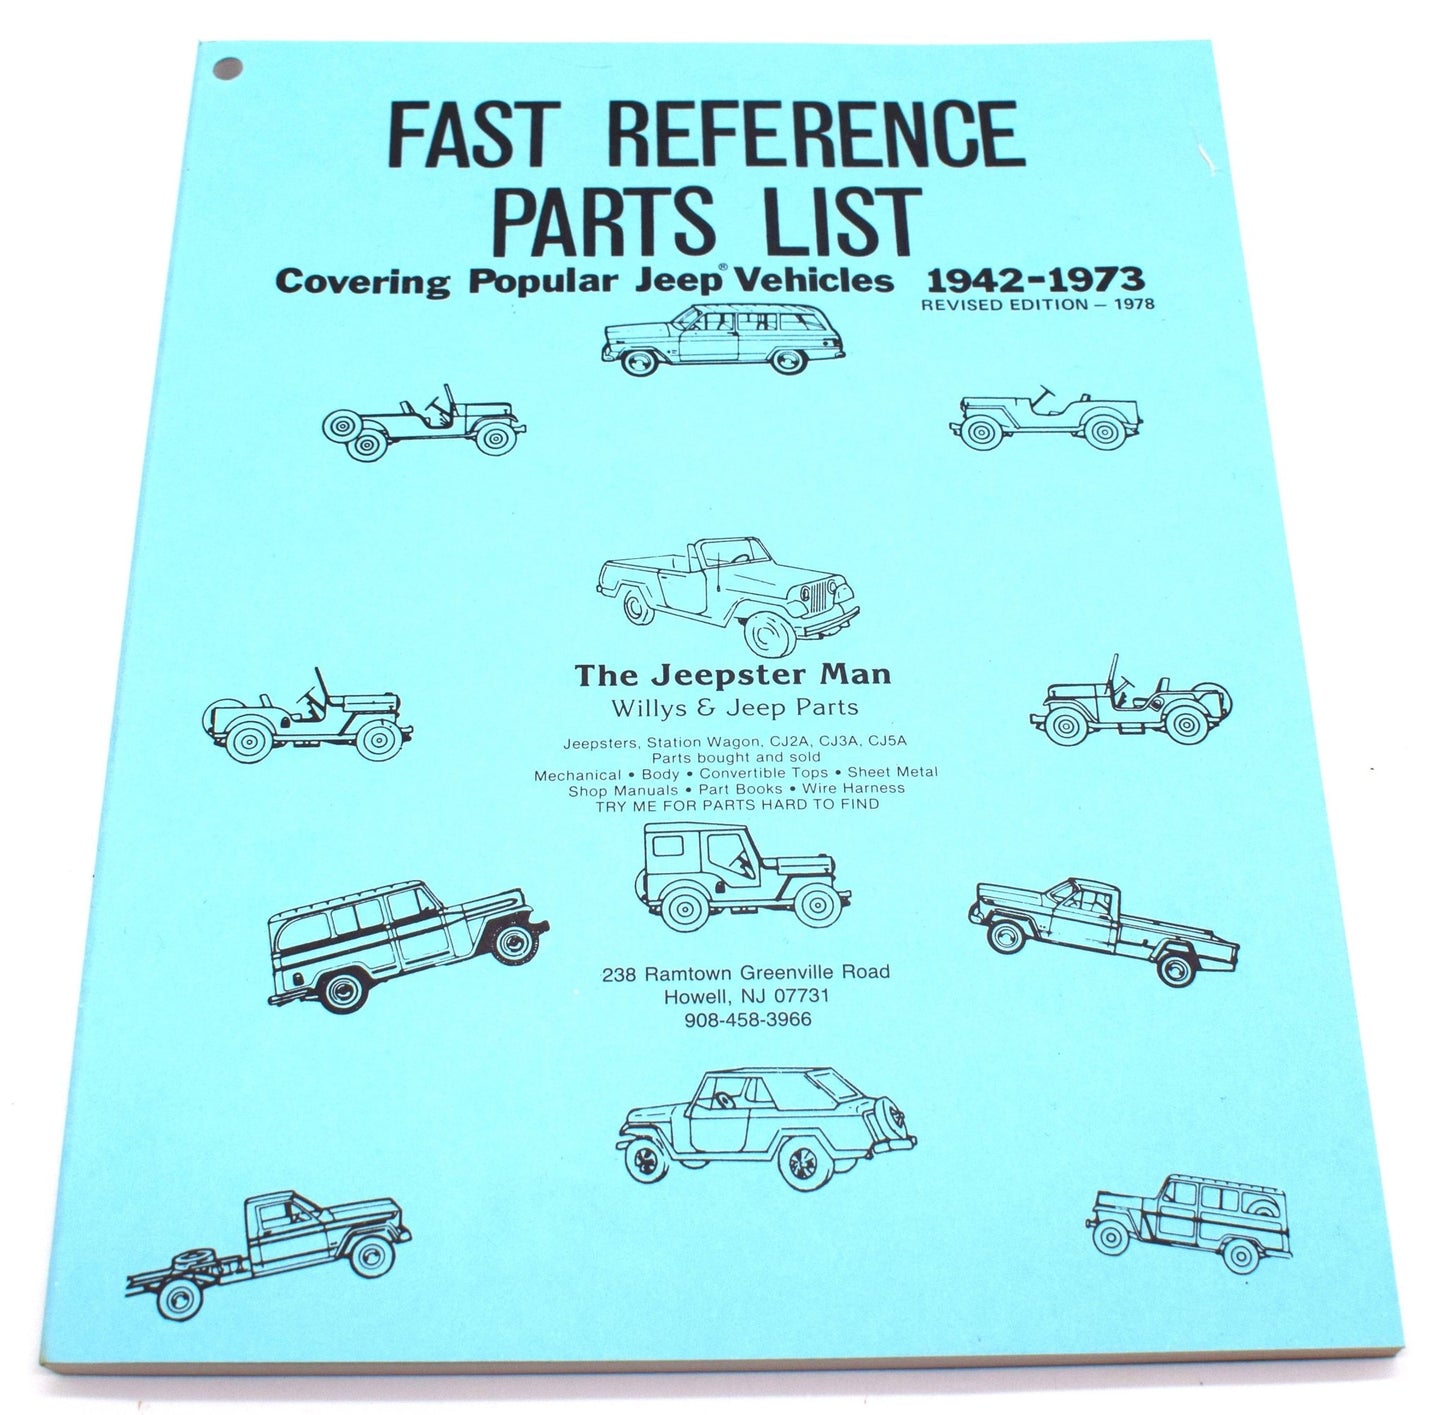 Fast Reference Parts List - Covering Popular Jeep Vehicles - The JeepsterMan